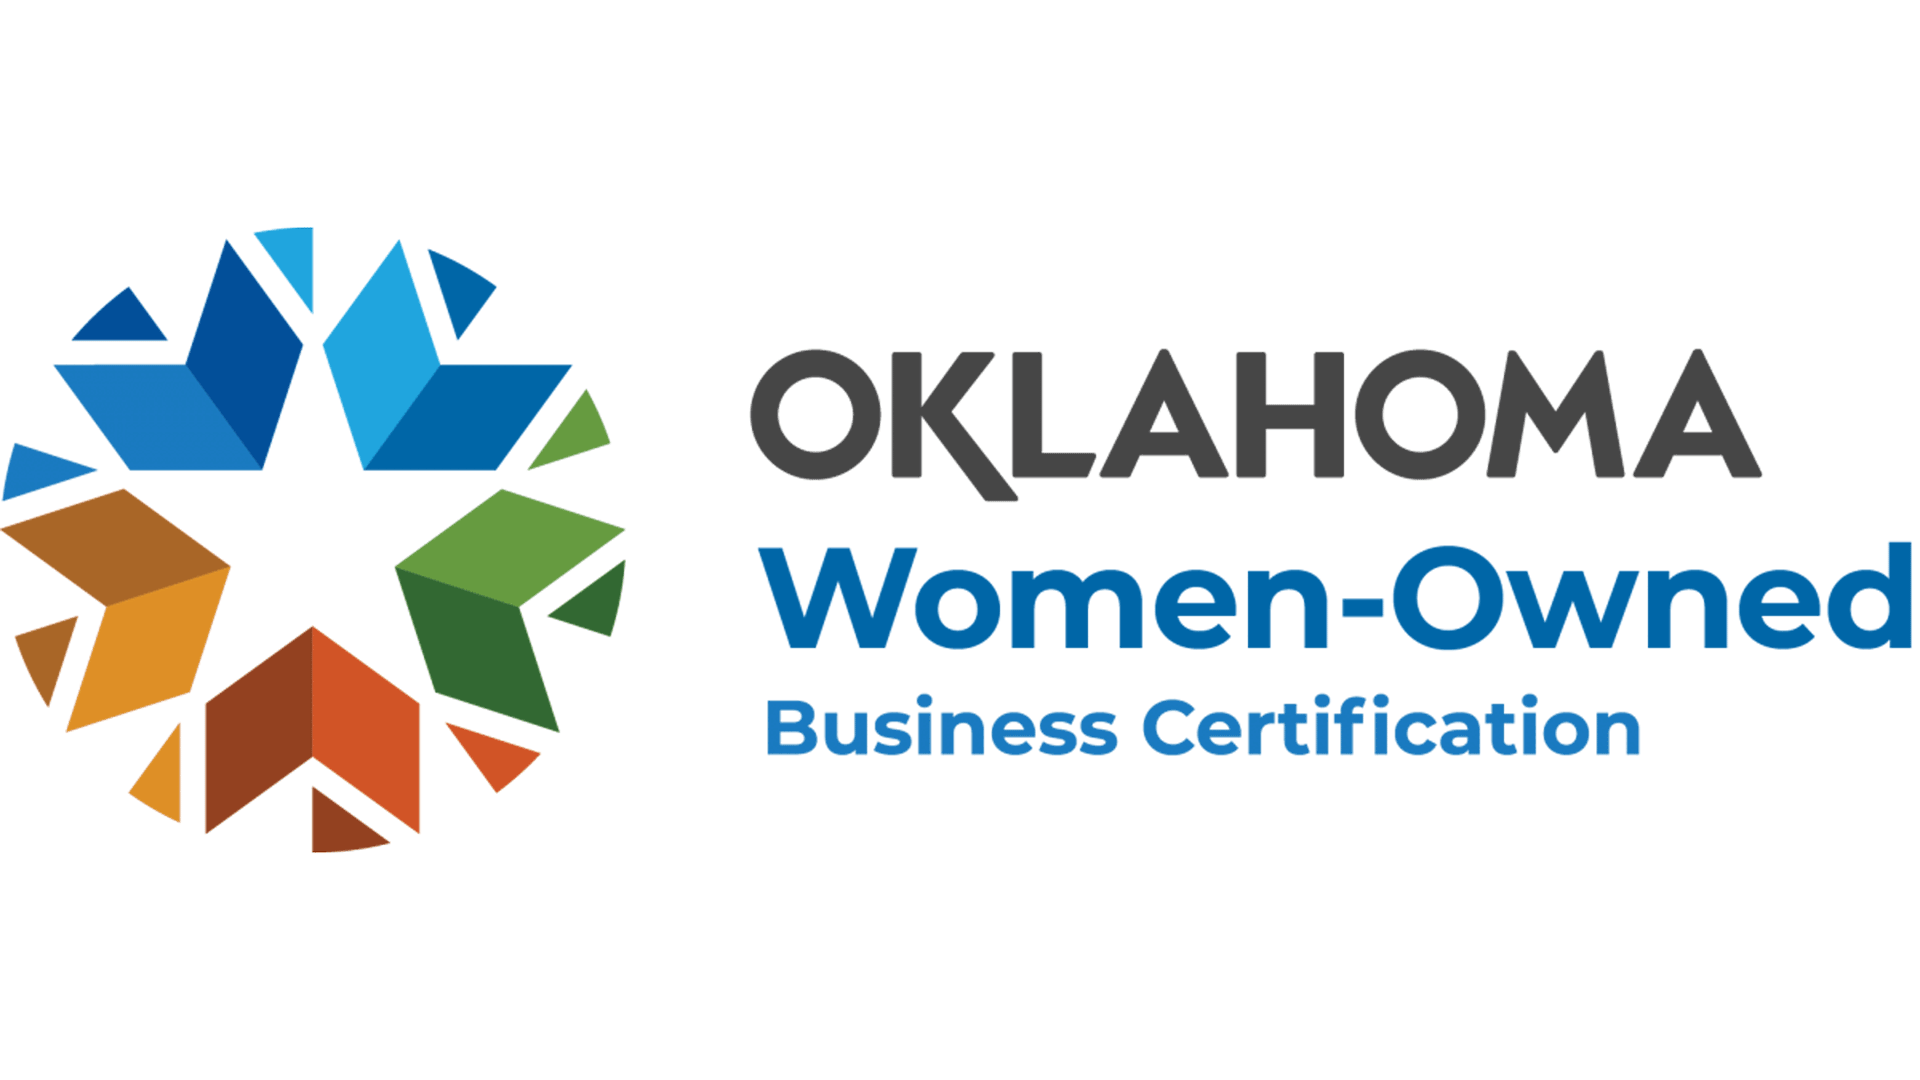 Oklahoma Women-Owned Business Certification Emblem